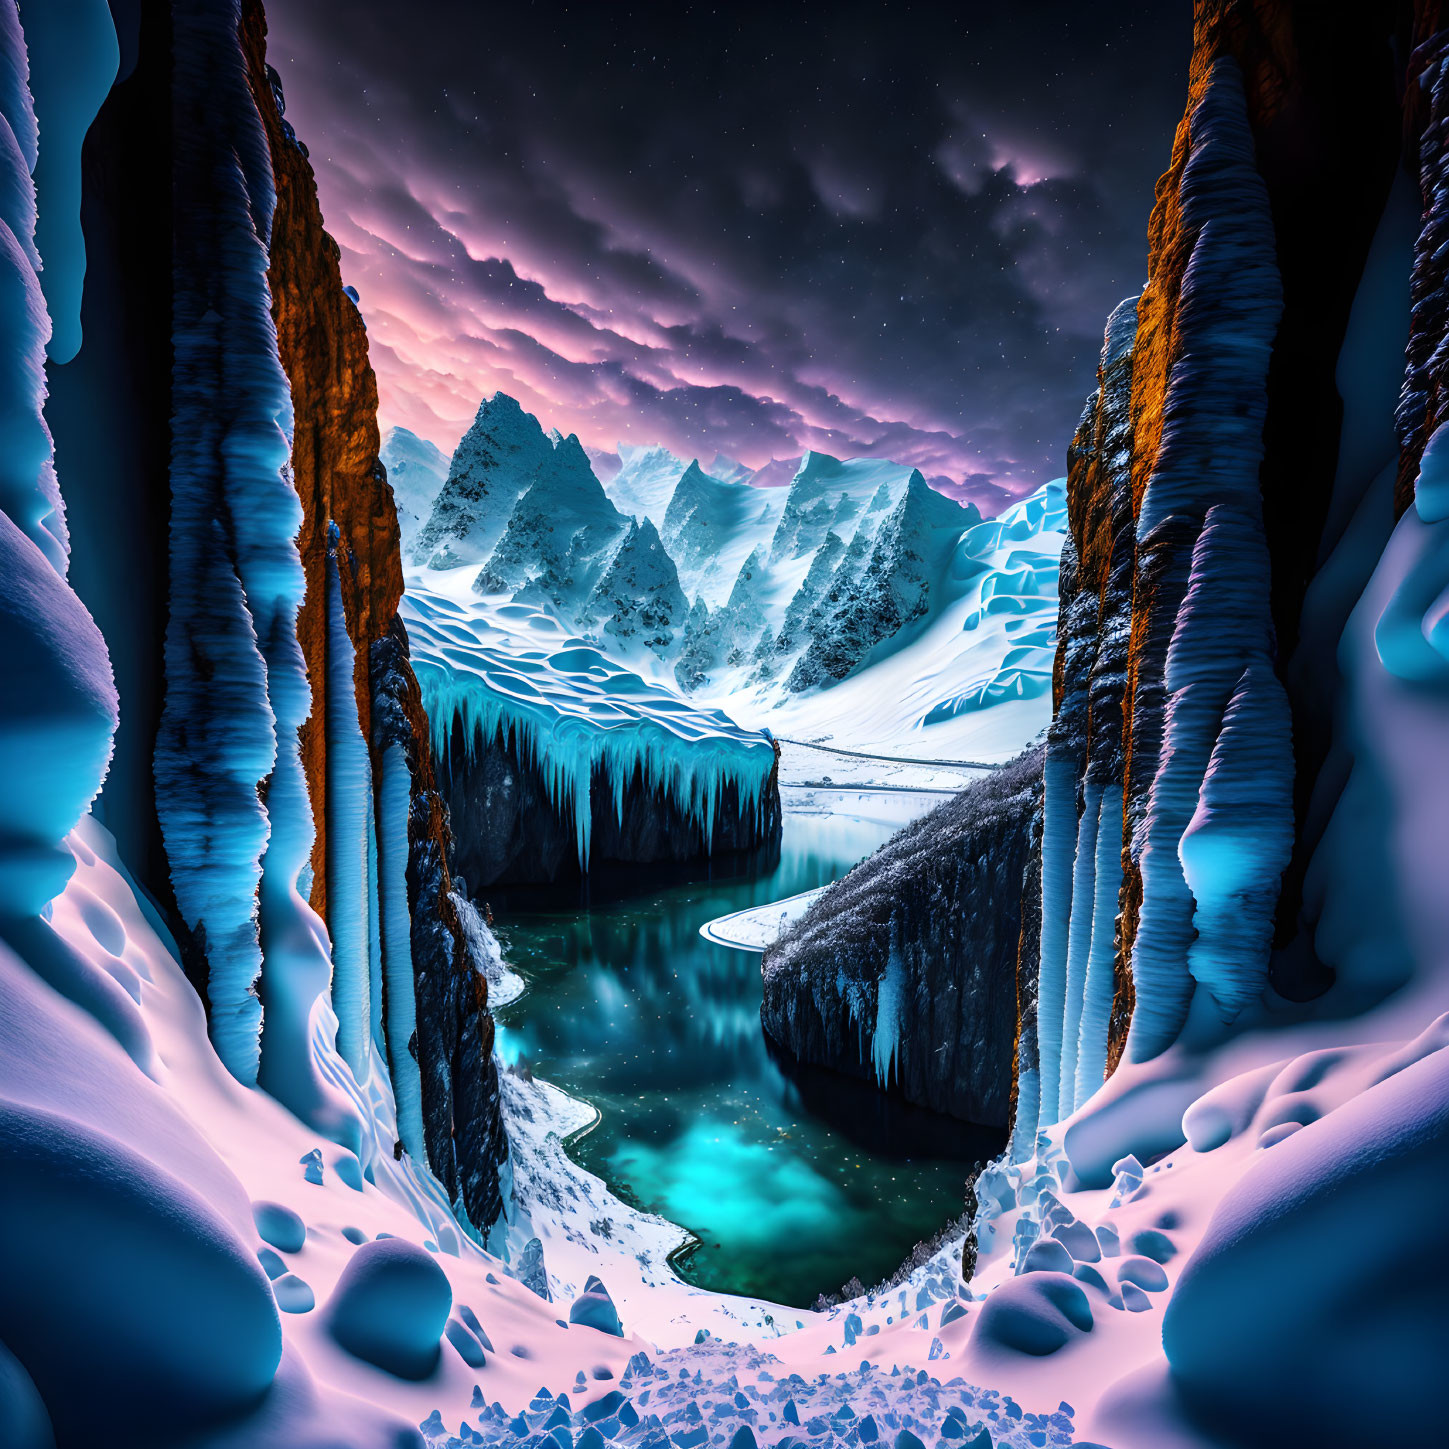 Surreal night-time landscape with towering ice formations, snow-covered mountains, green lake, star-st